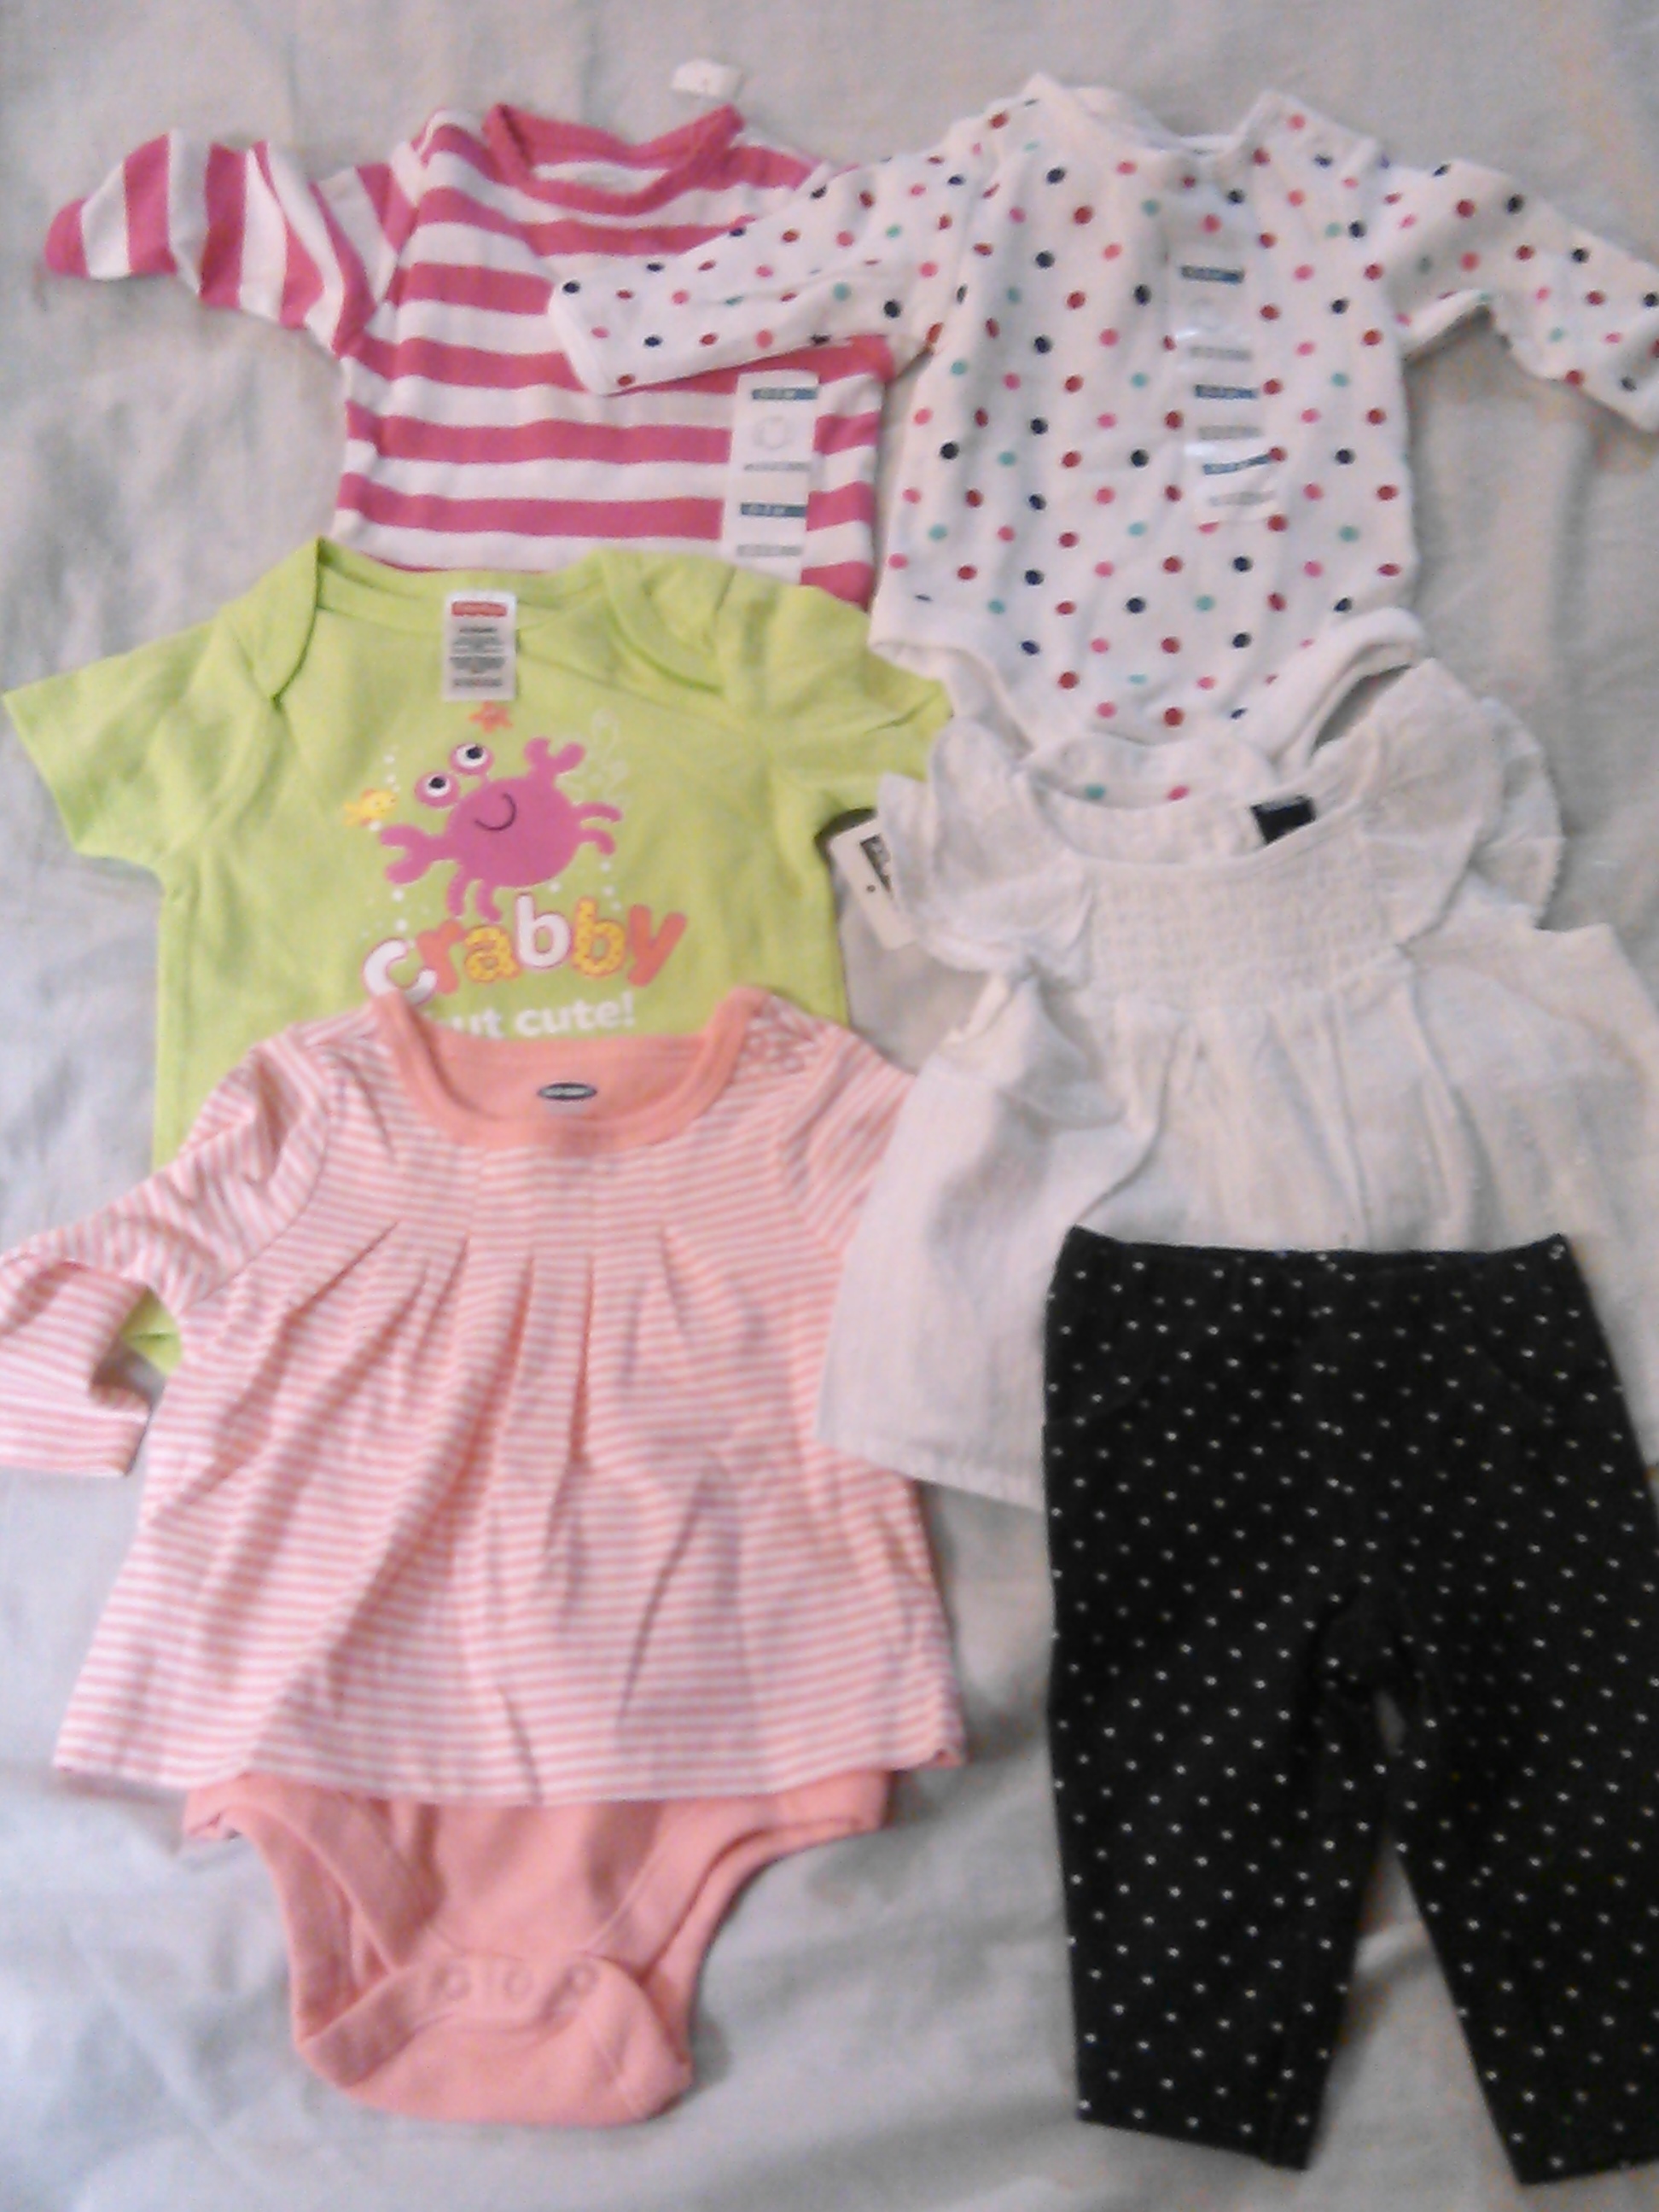 New Born girls clothes and shoes